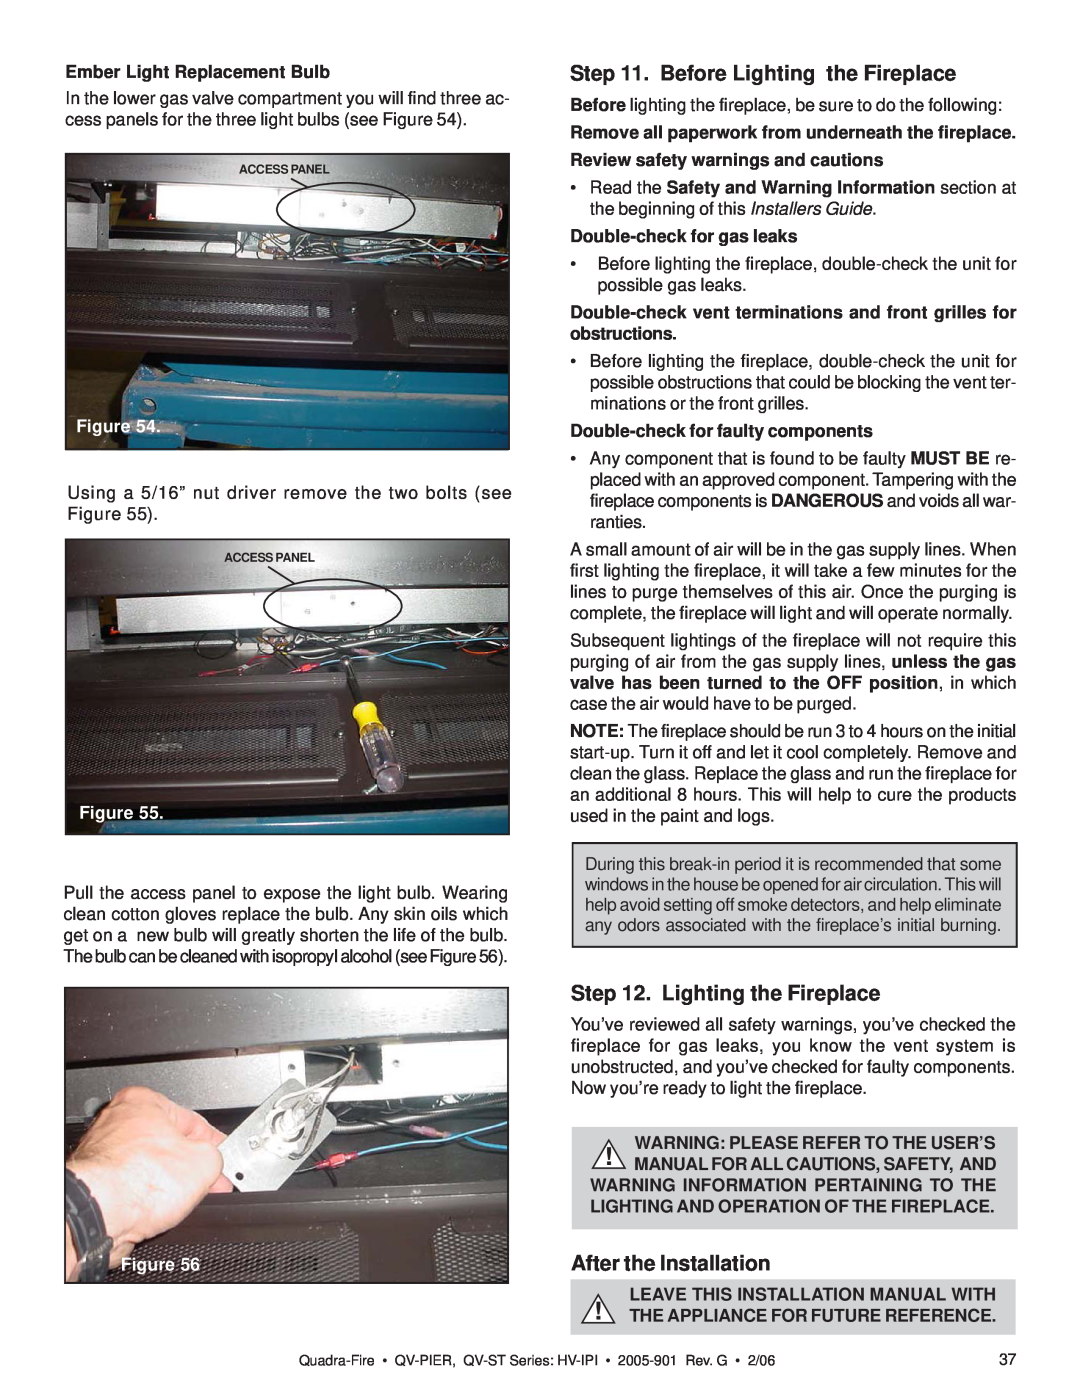 Quadra-Fire QV-ST, QV-PIER owner manual Before Lighting the Fireplace, After the Installation 